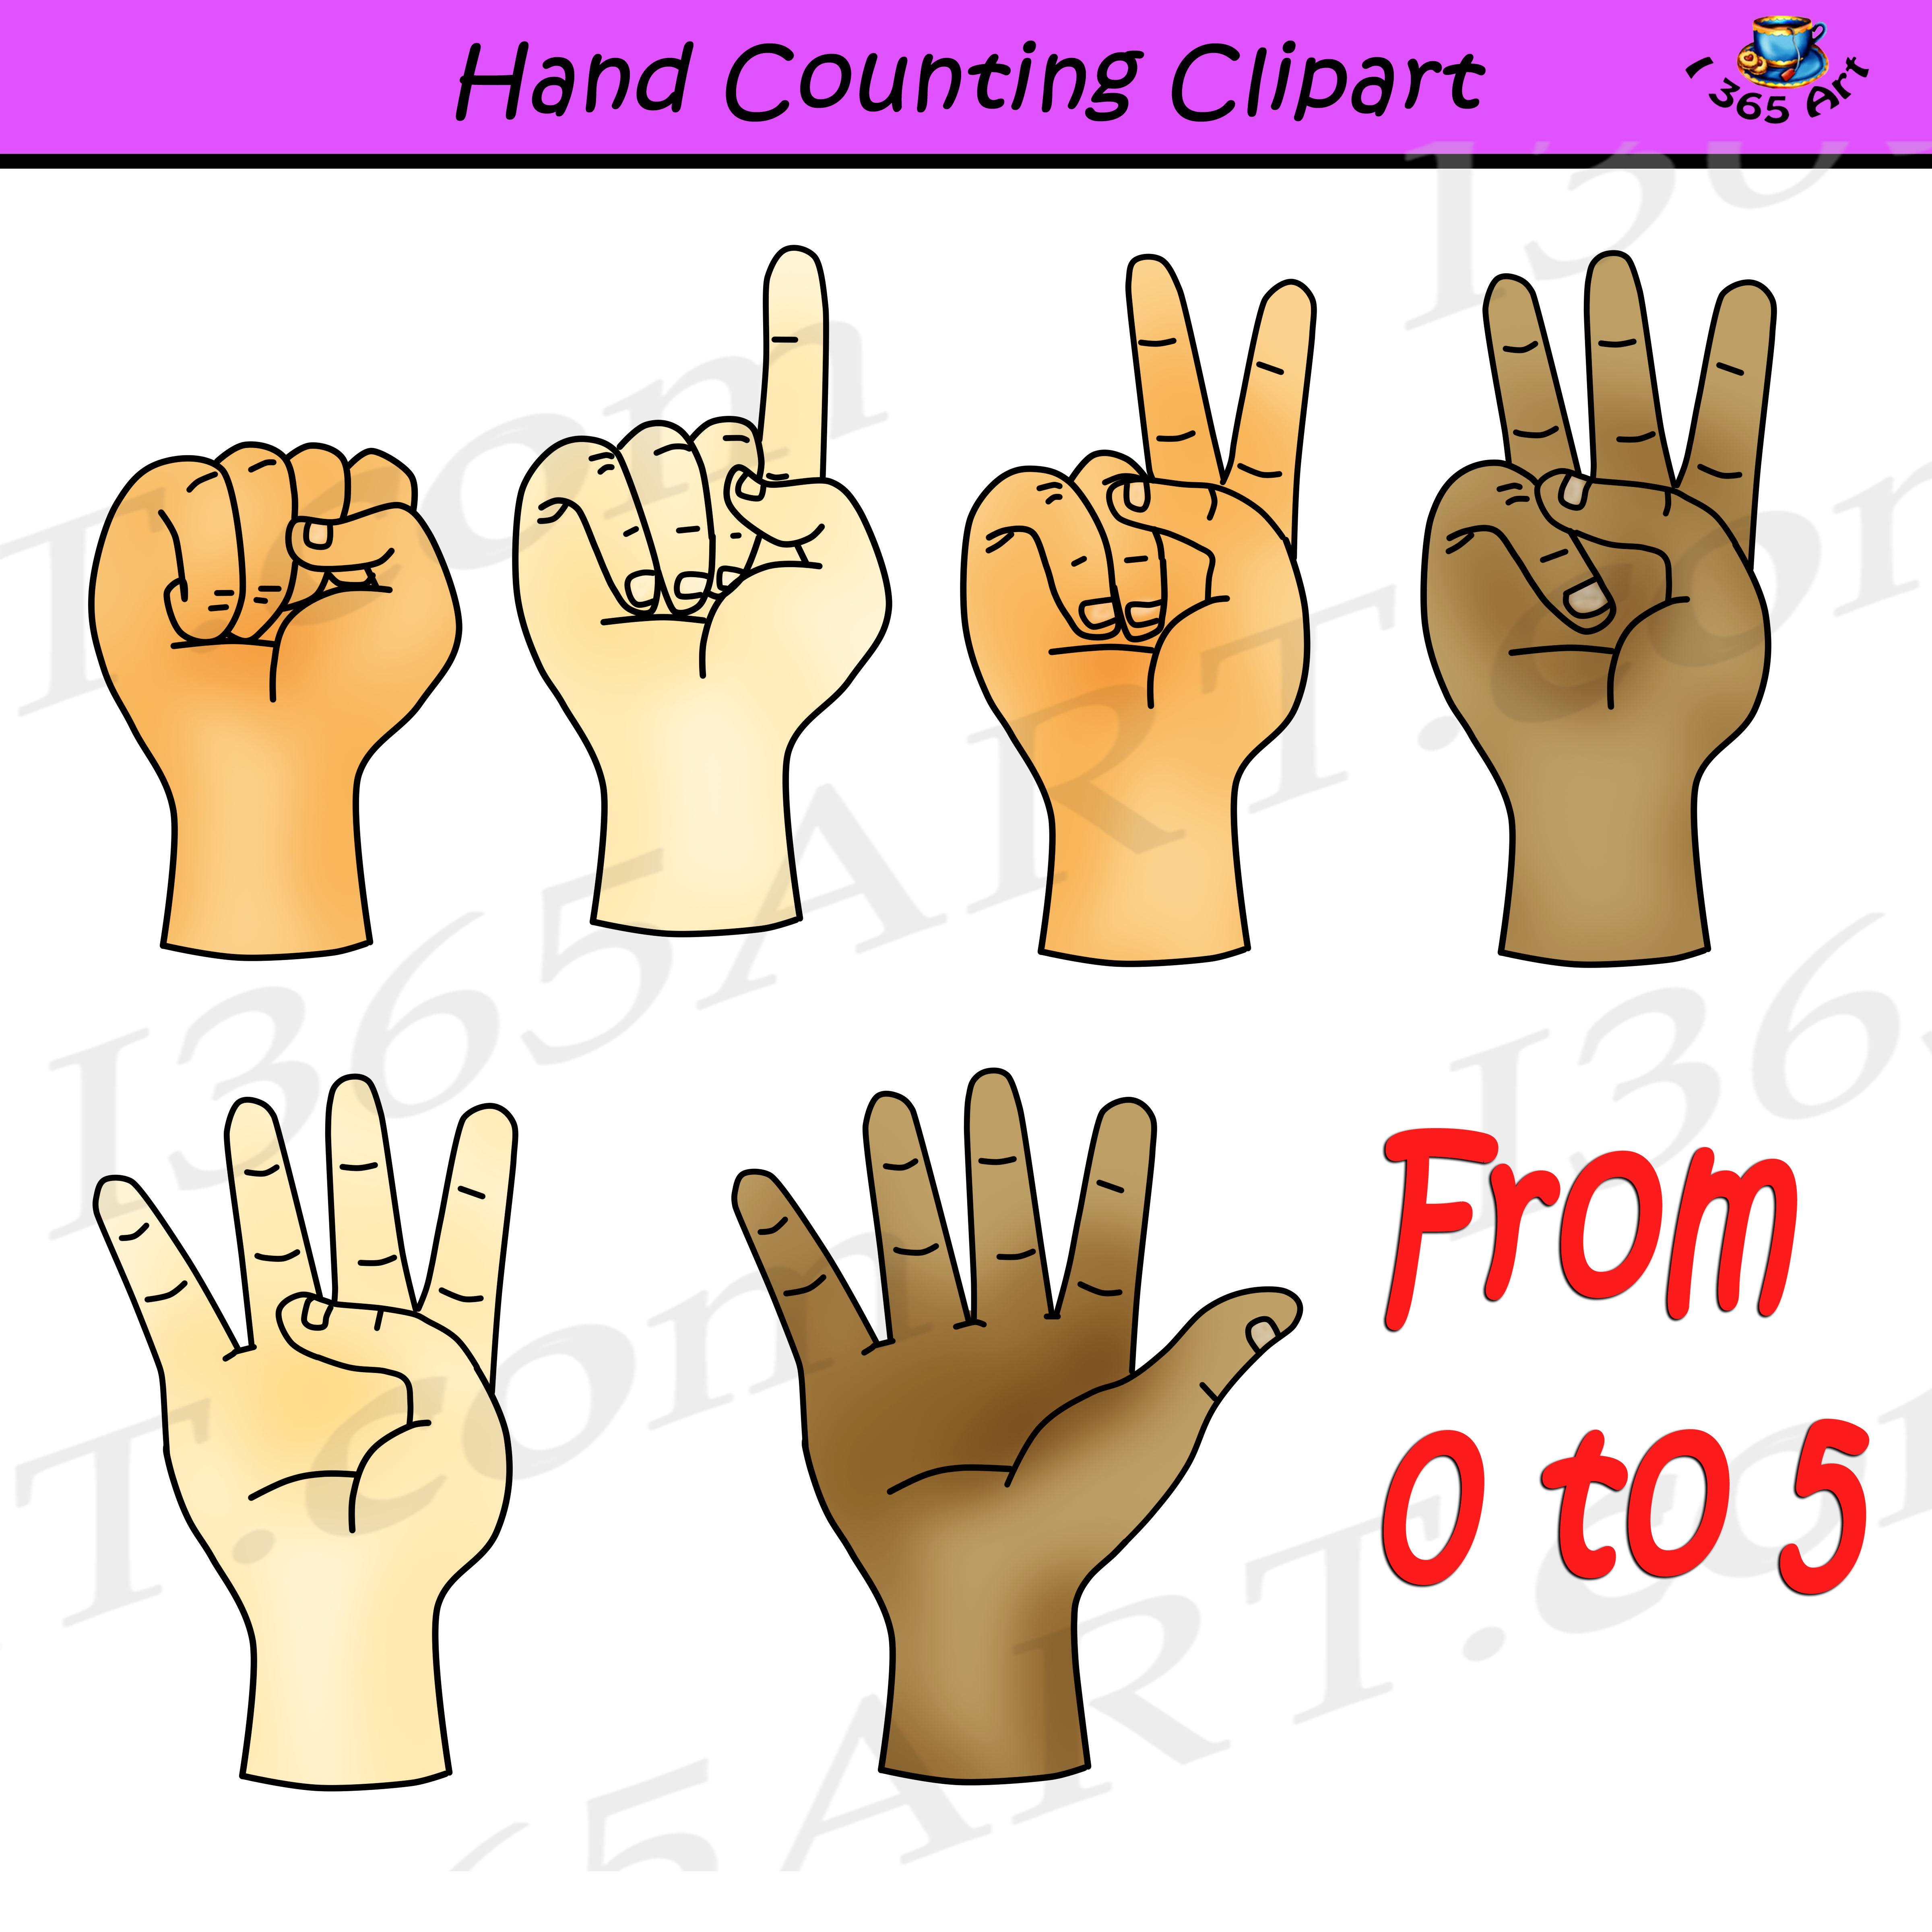 Hand Counting Clipart Set Finger Counting for Commercial.